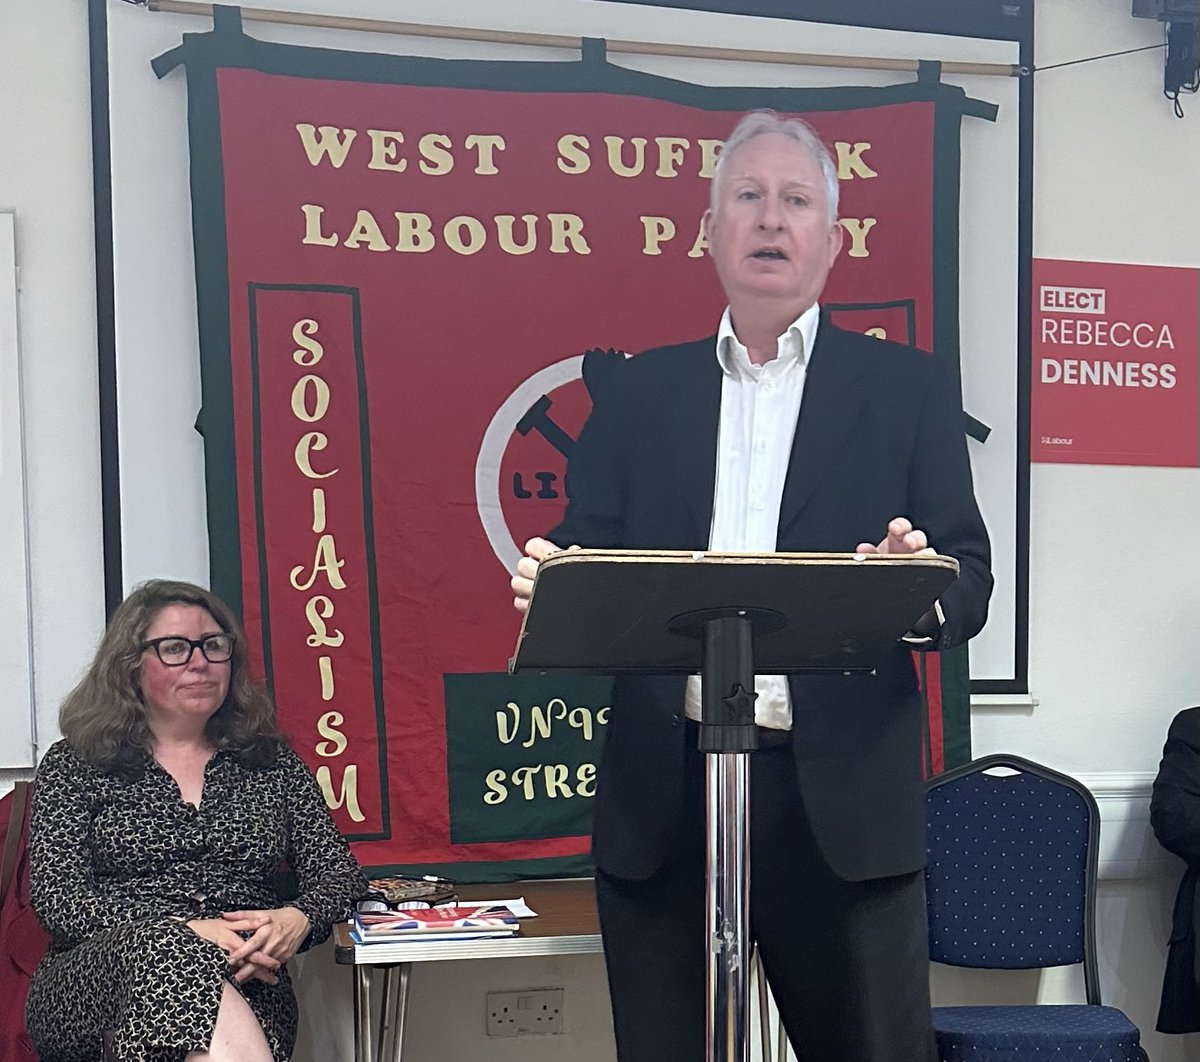 Fantastic launch for our #Labour candidate here in #WestSuffolk @RebeccaDenness. As Matt Hancock slinks off and the Tories chuck Nick ‘architect of the Dementia Tax’ Timothy at us, we are up for the fight and ready to turn West Suffolk red! #GeneralElectionNow